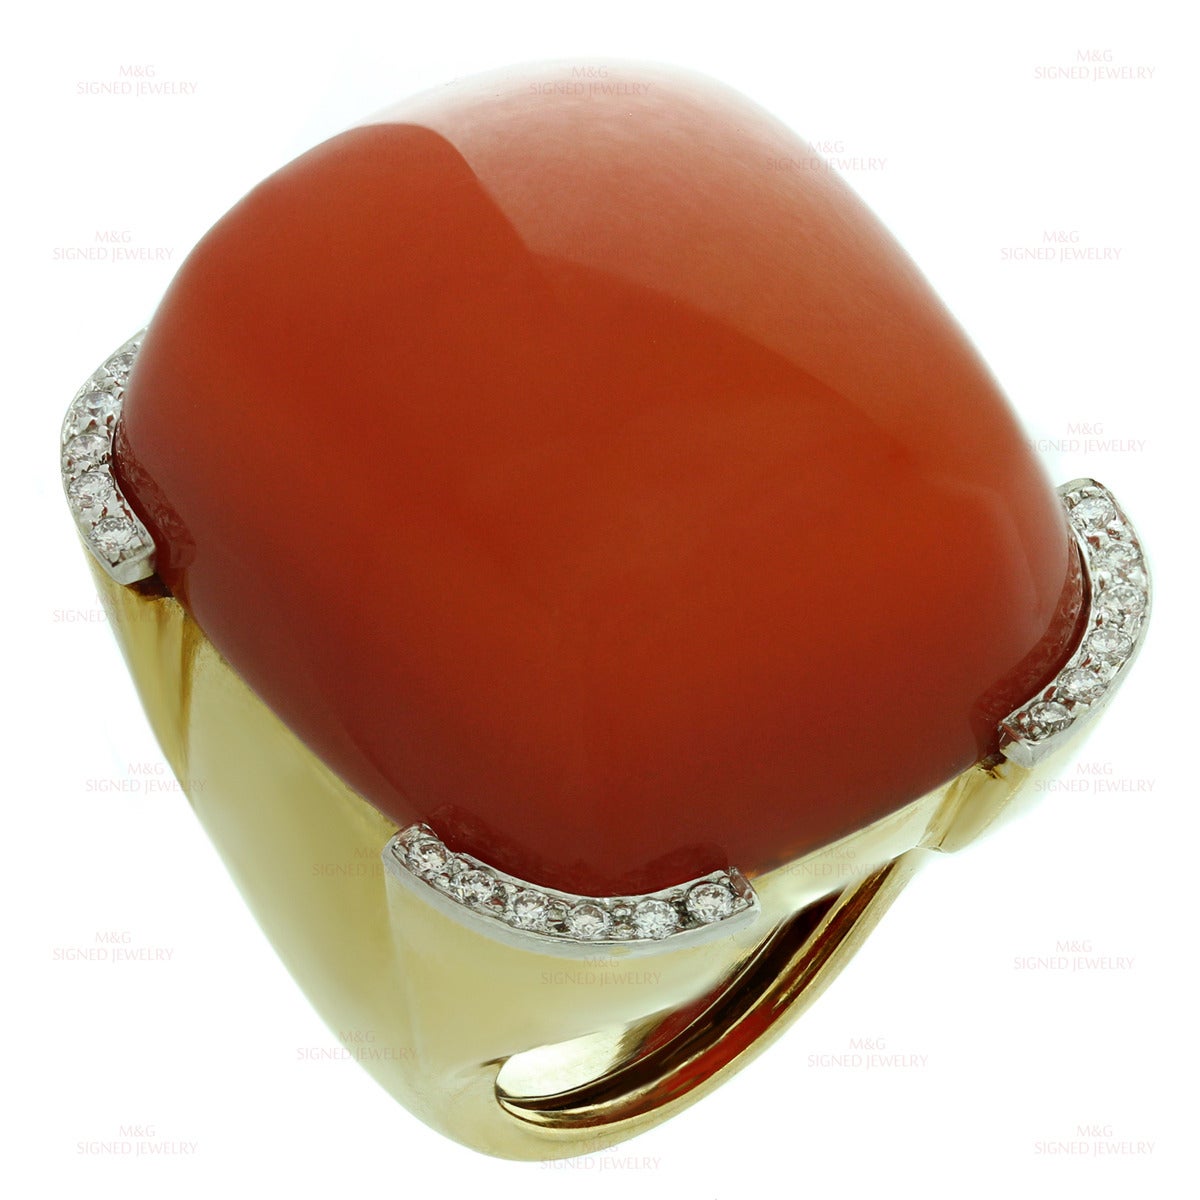 This magnificent geometric David Webb ring is crafted in 18k polished yellow gold and set with a bright reddish oval cabochon carnelian stone measuring 26.0mm x 30.0mm. Fine platinum corners are beautifully accented with round brilliant-cut G-H